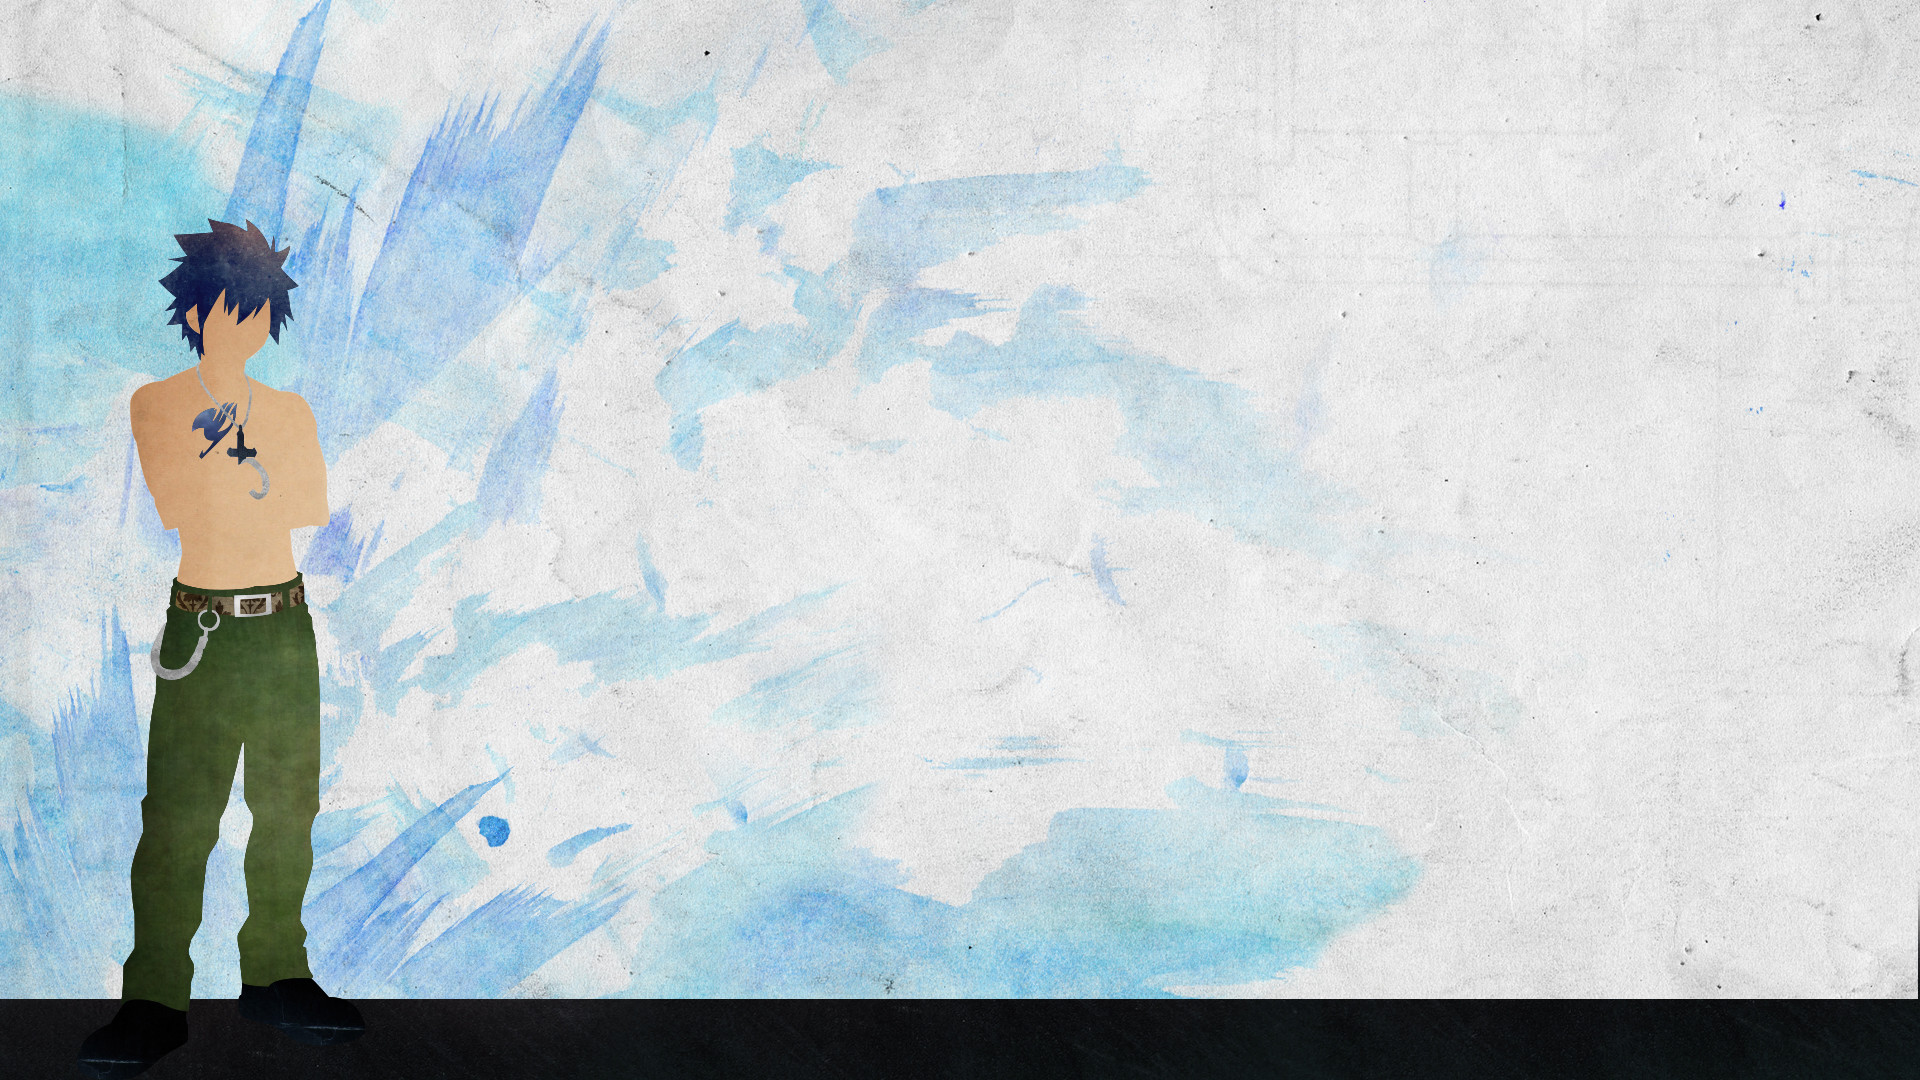 1920x1080 Fairy Tail Gray Wallpaper [] by Enrozi